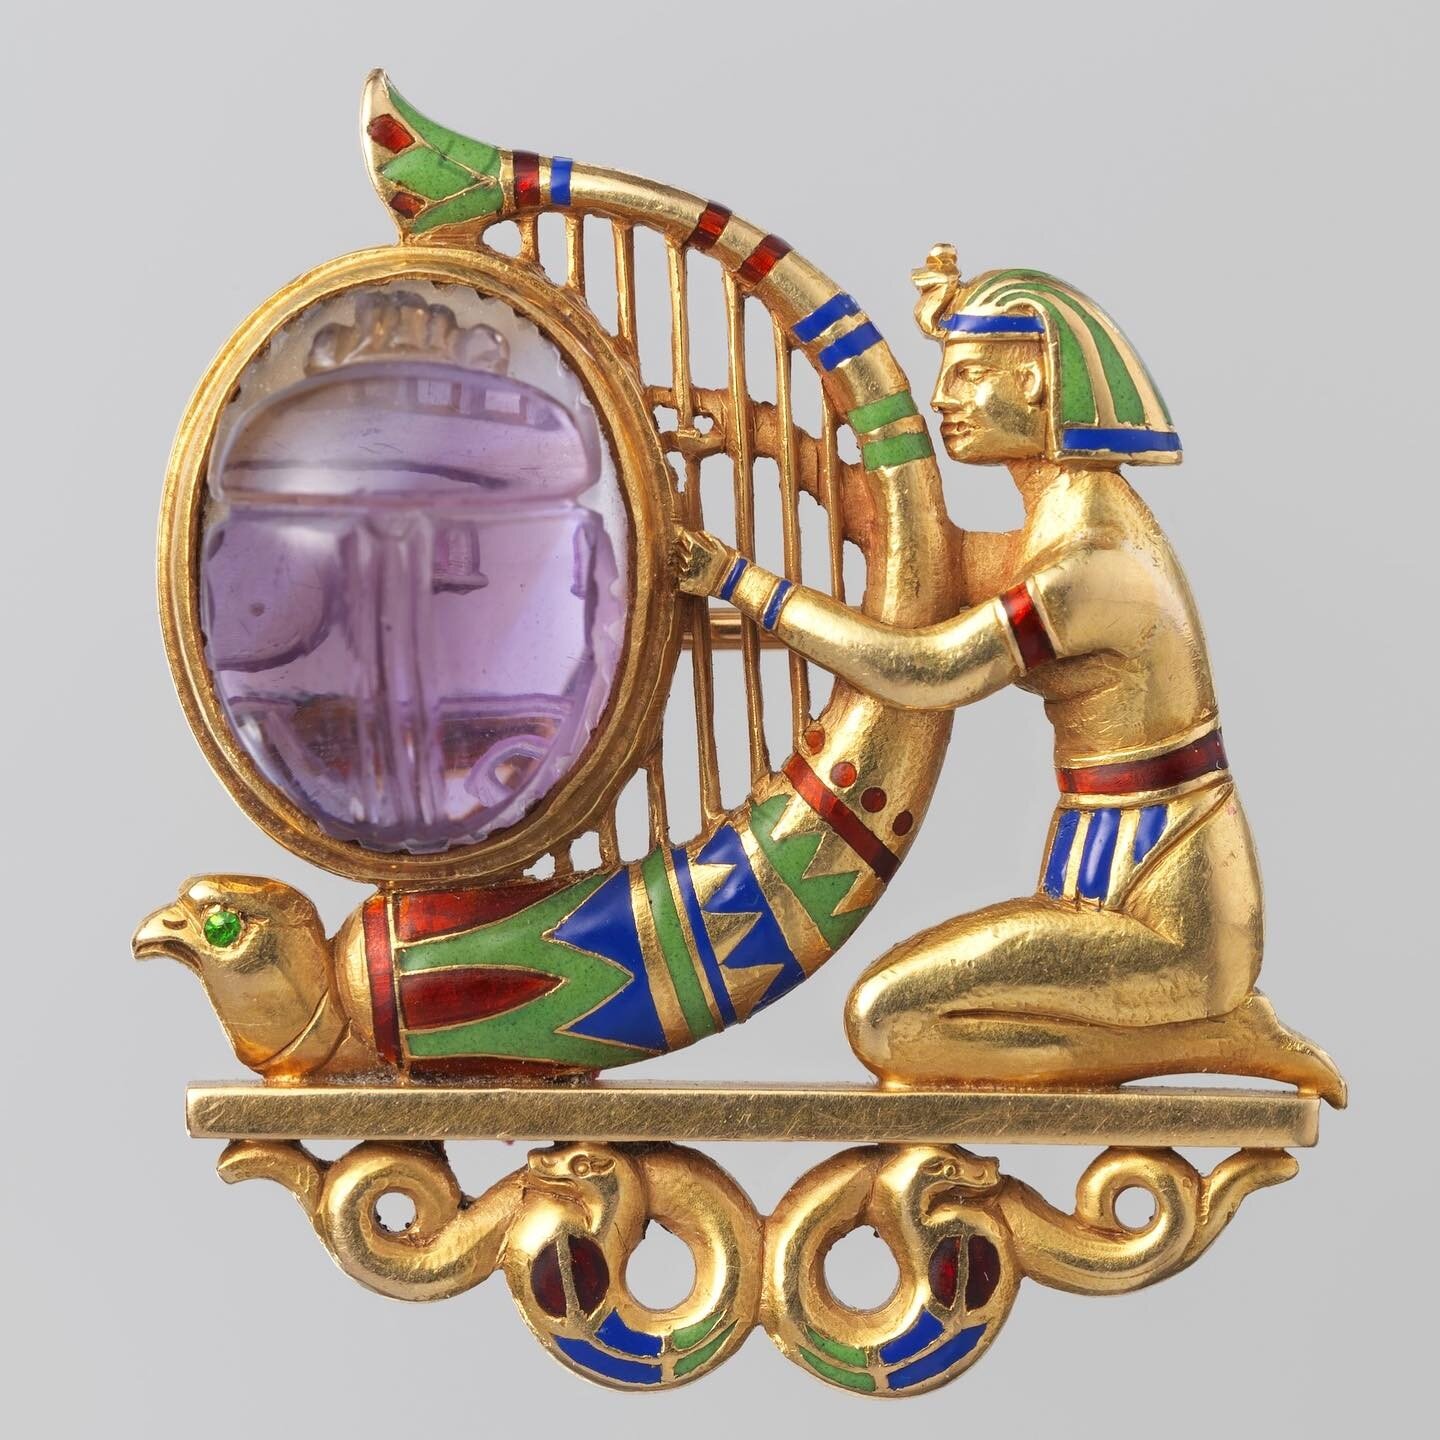 Brooch (circa 1900), Theodore B. Starr (American, 1837-1907), Gold, amethyst, demantoid garnet, and enamel. Source: Metropolitan Museum of Art, New York. ⁠
⁠
***⁠
⁠
&quot;This piece is a lovely example of T.B. Starr&rsquo;s work in the Egyptian reviv